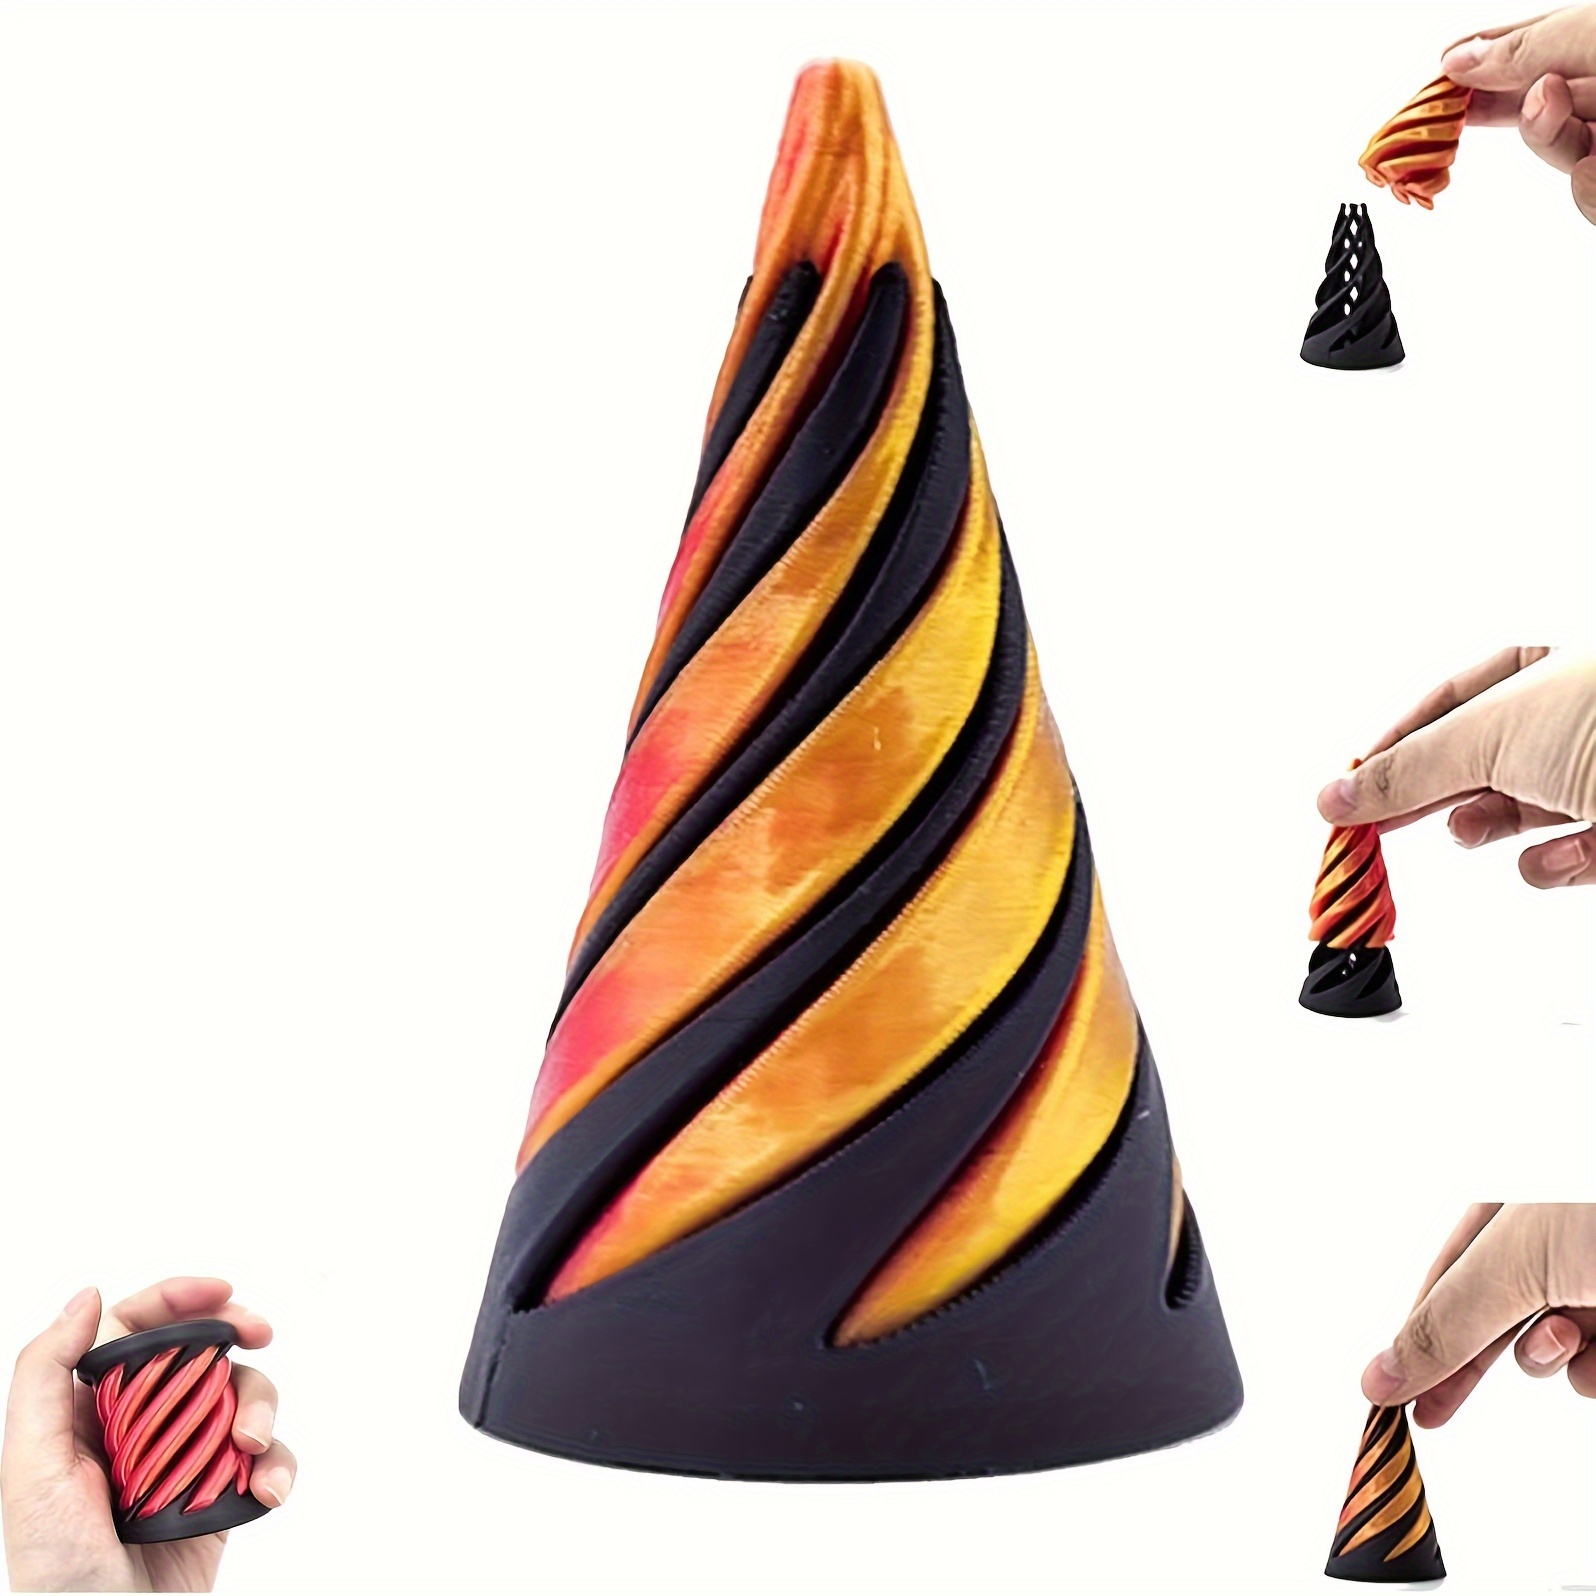 

Classic Style Impossible Pyramid Sculpture, Interactive 3d Printed Twisted Cone Statue For Halloween Decor, Tabletop Plastic Art Piece